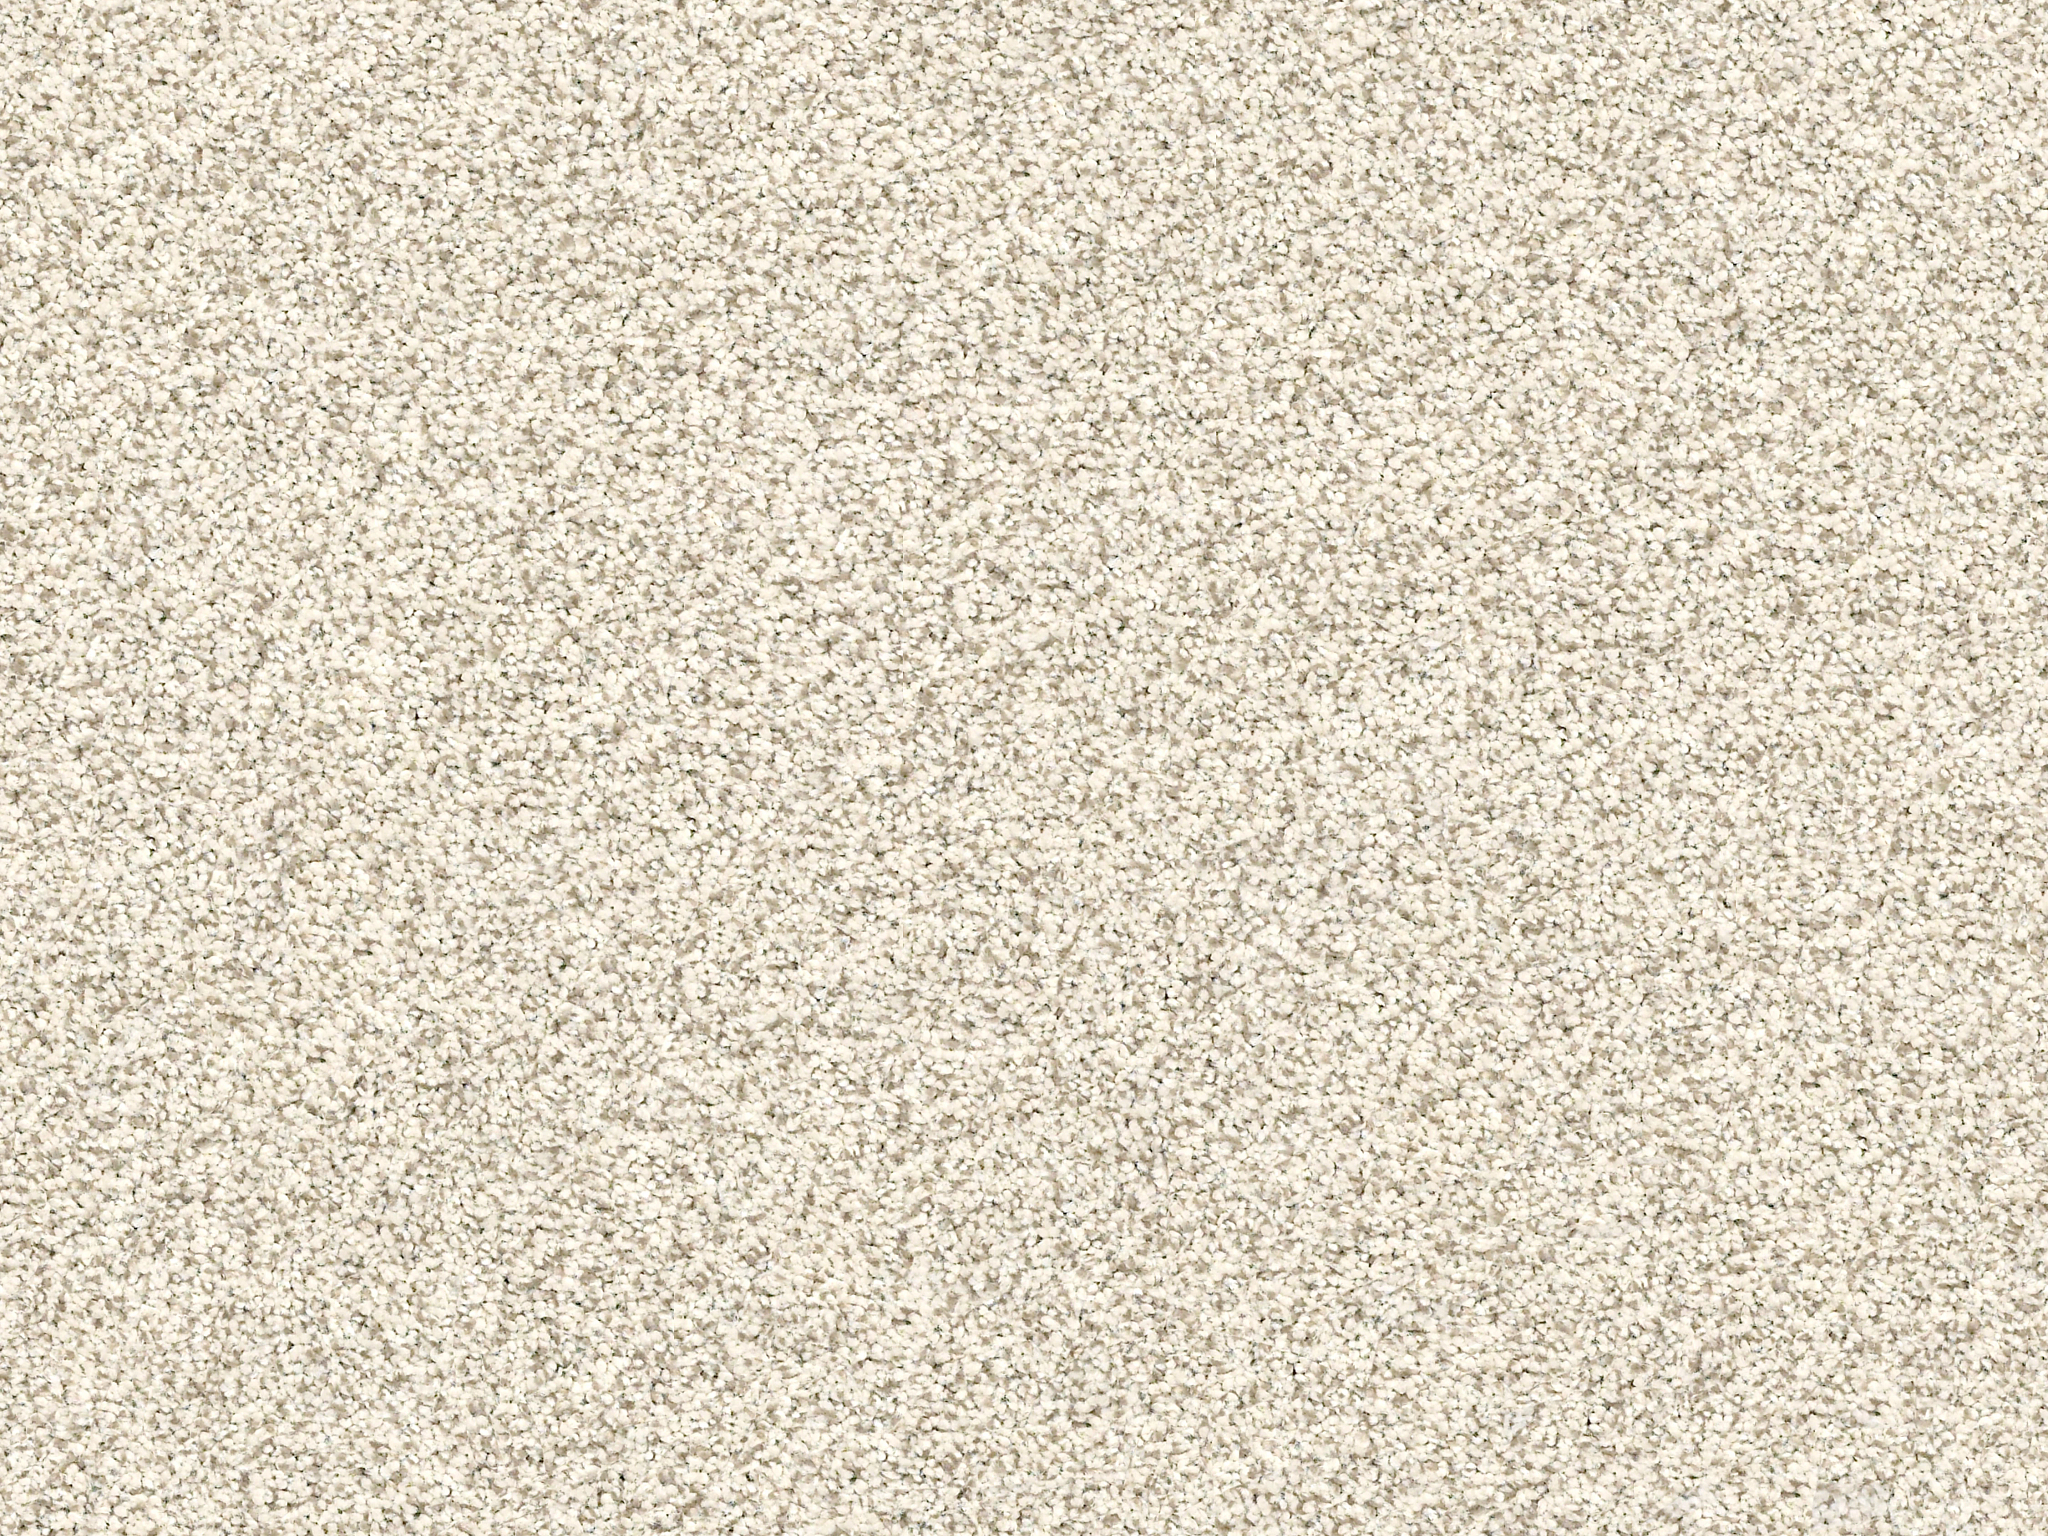 Serenity Cove Carpet - Misty Dawn Zoomed Swatch Image